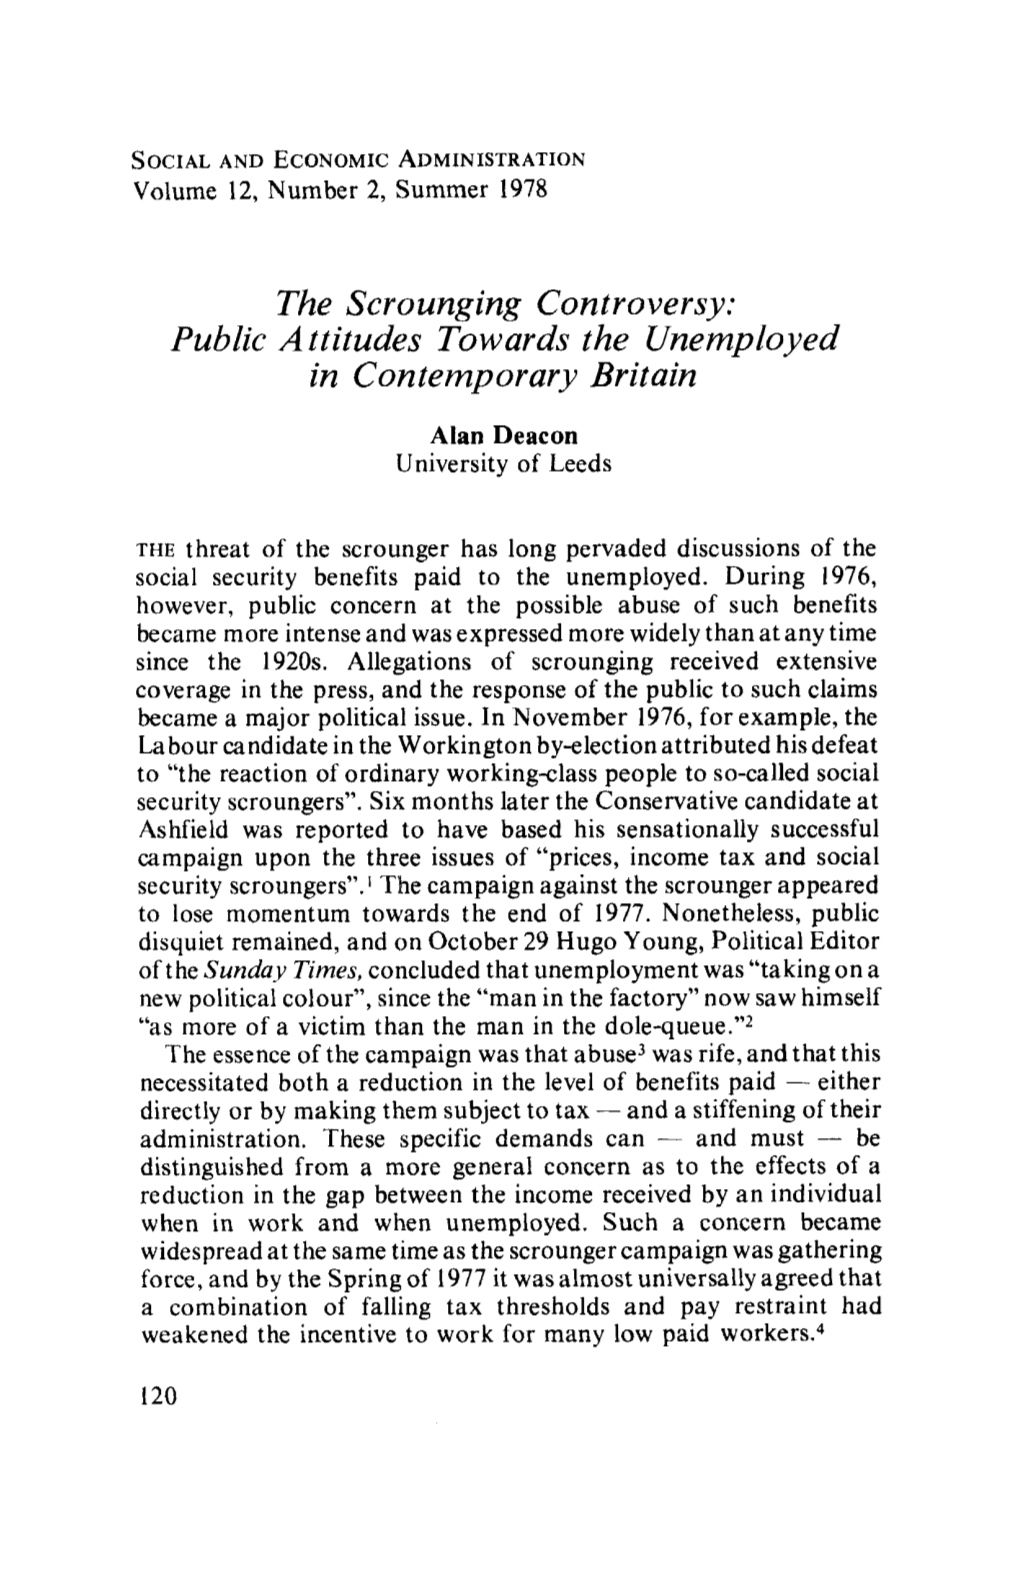 The Scrounging Controversy: Public Attitudes Towards the Unemployed in Contemporary Britain